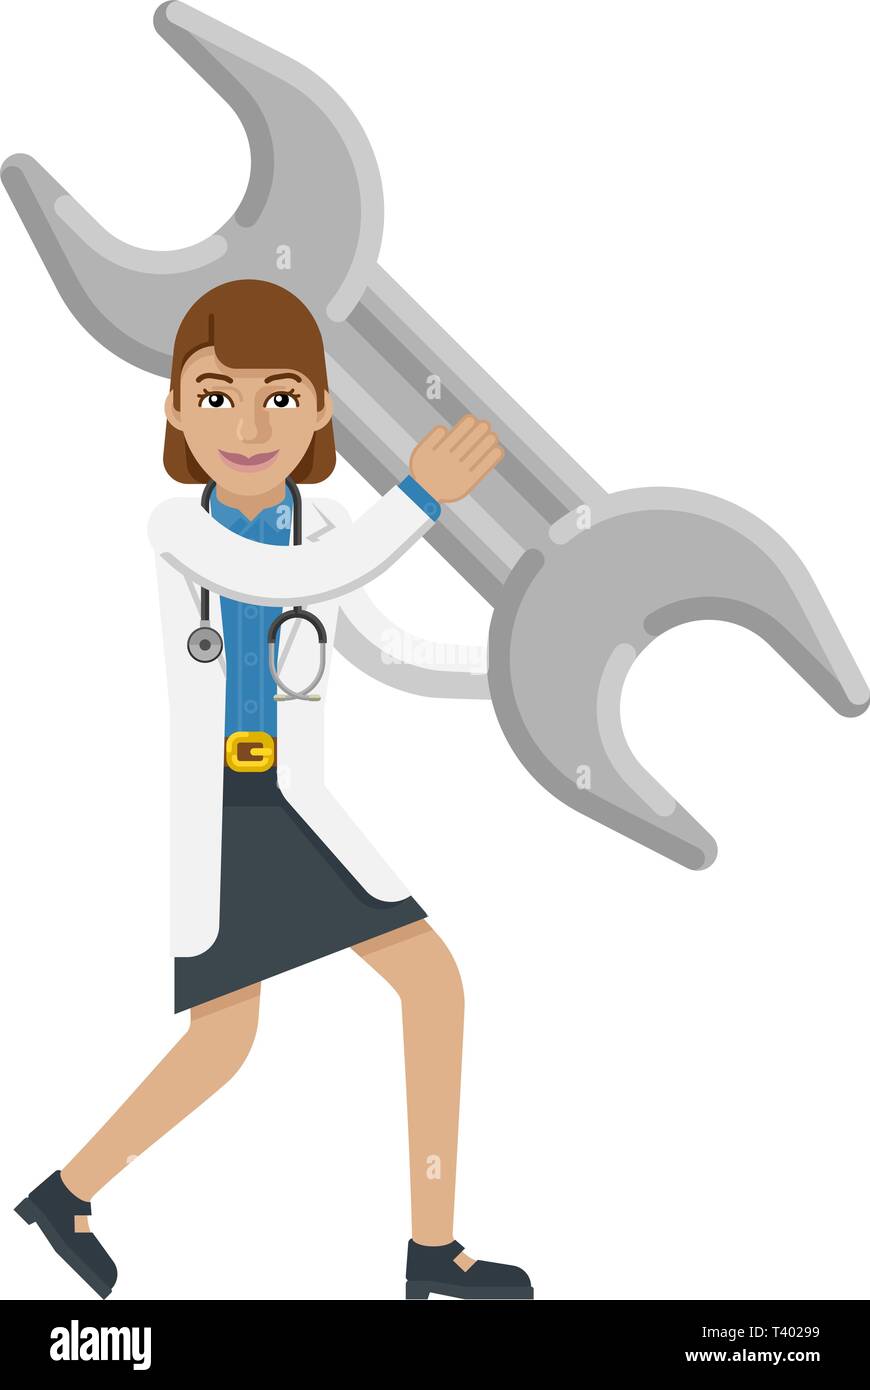 Doctor Woman Holding Spanner Wrench Mascot Concept Stock Vector